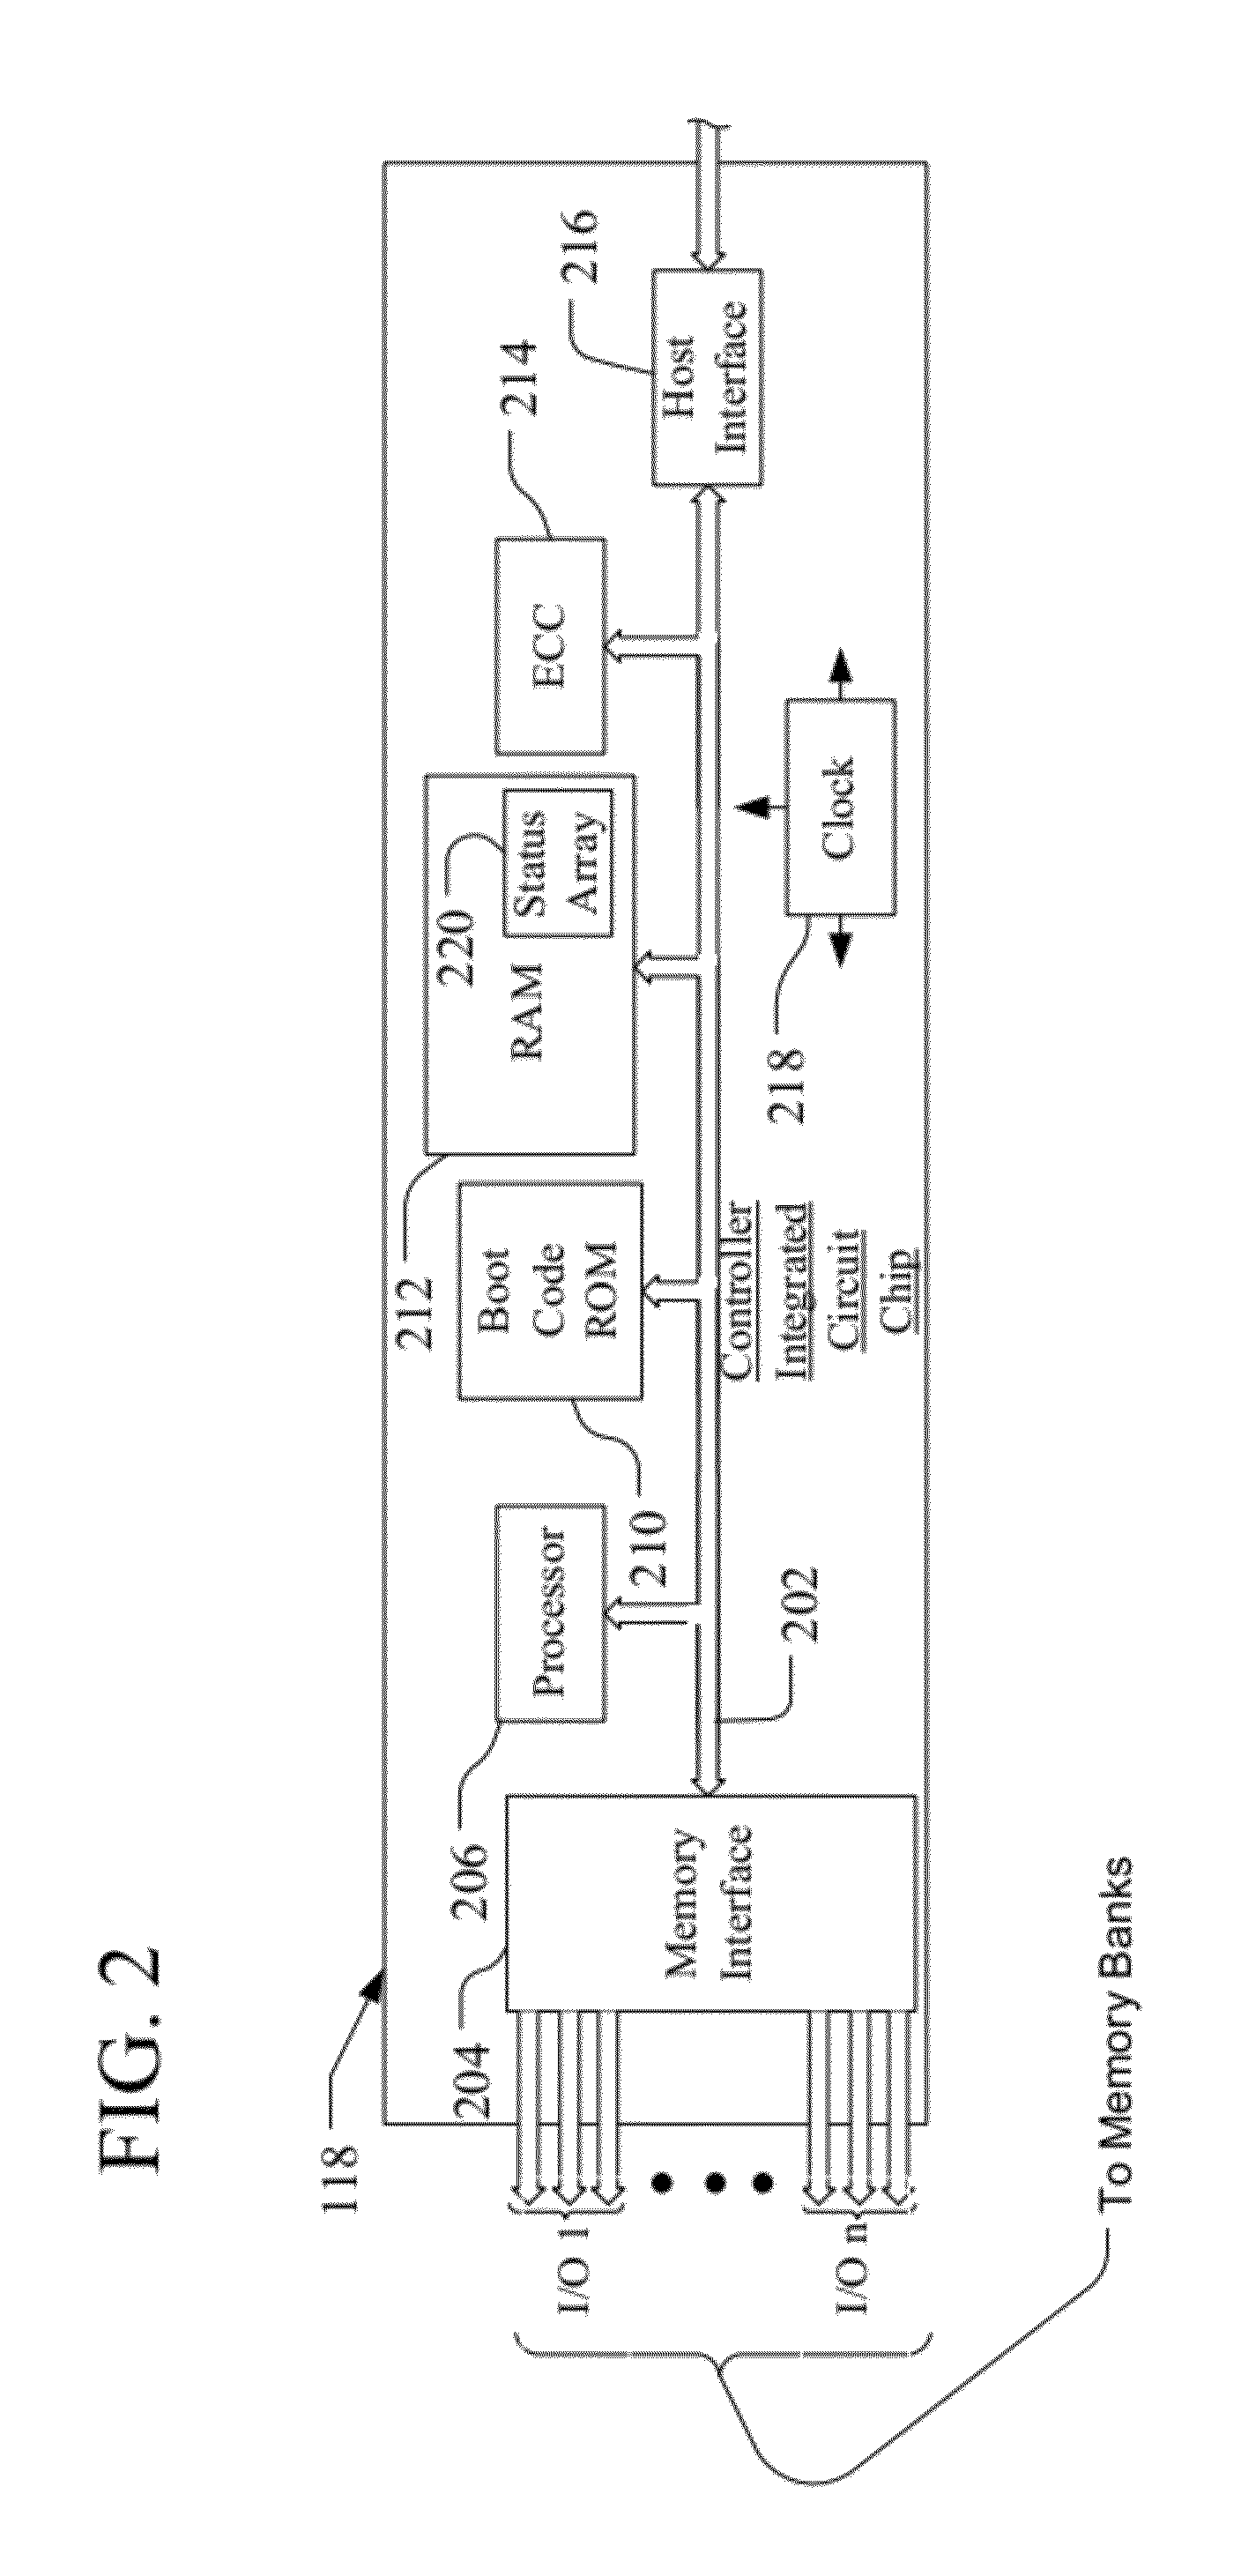 Synchronized maintenance operations in a multi-bank storage system